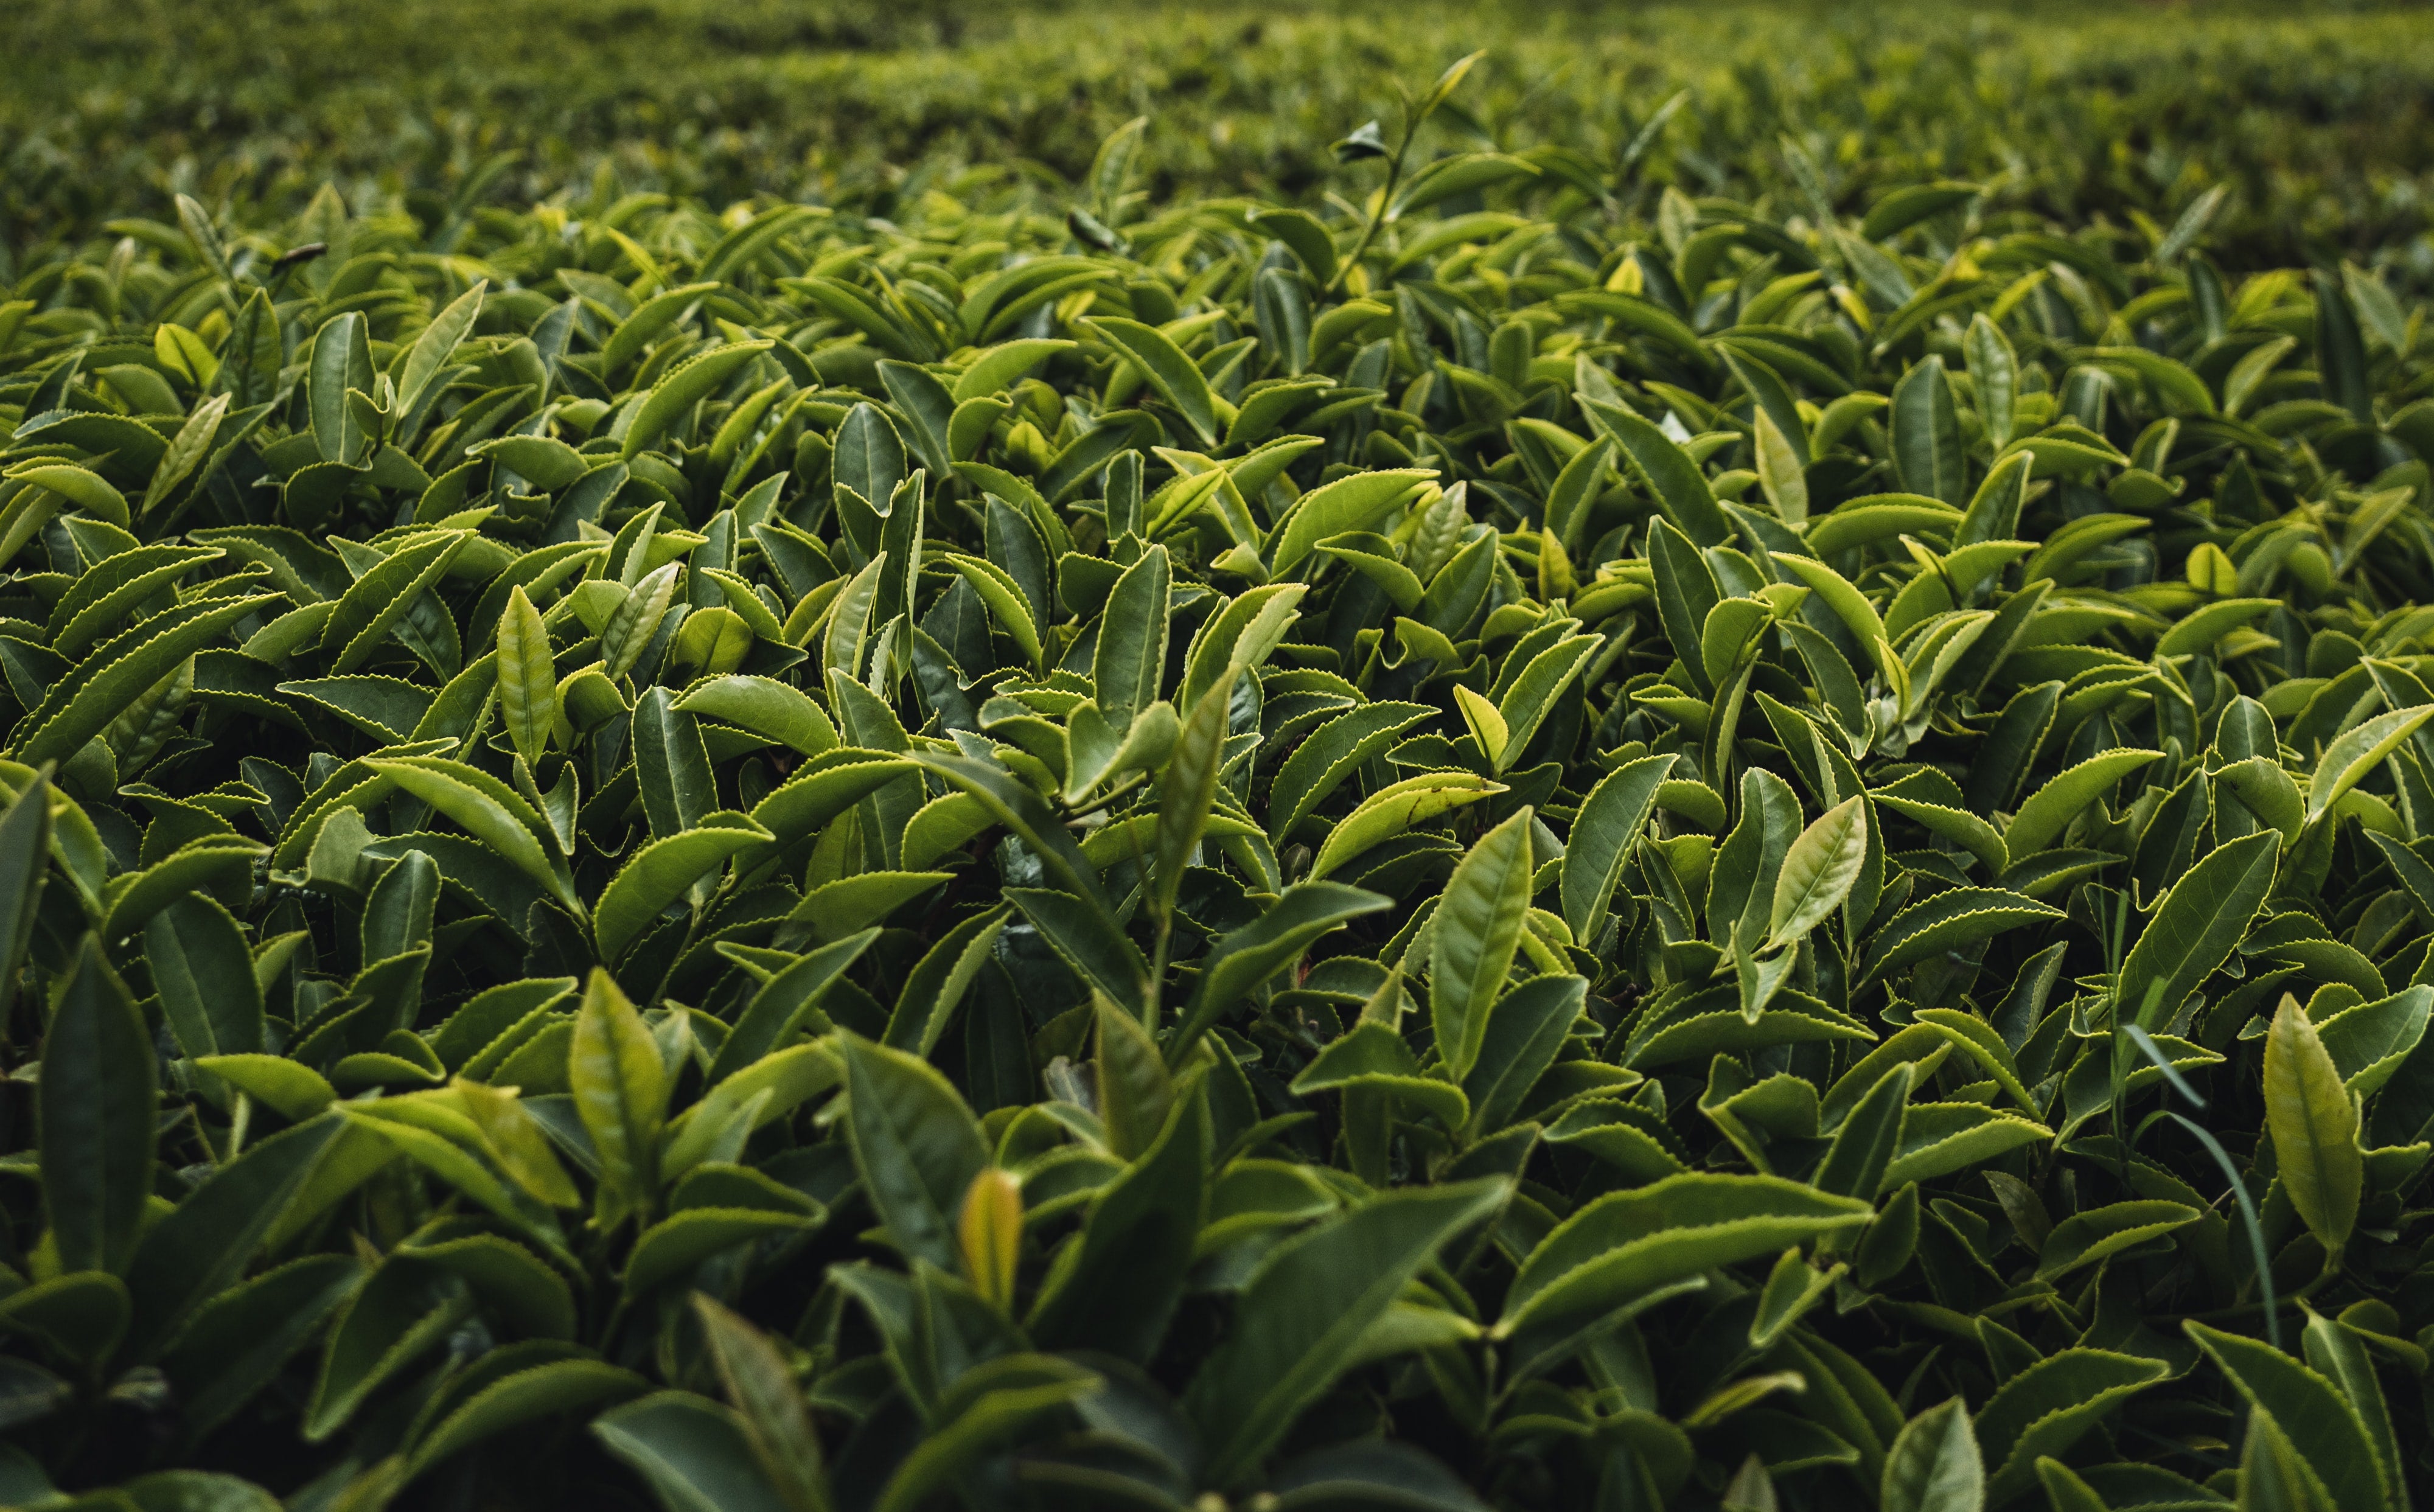 Beginner's Guide To The World of Teas